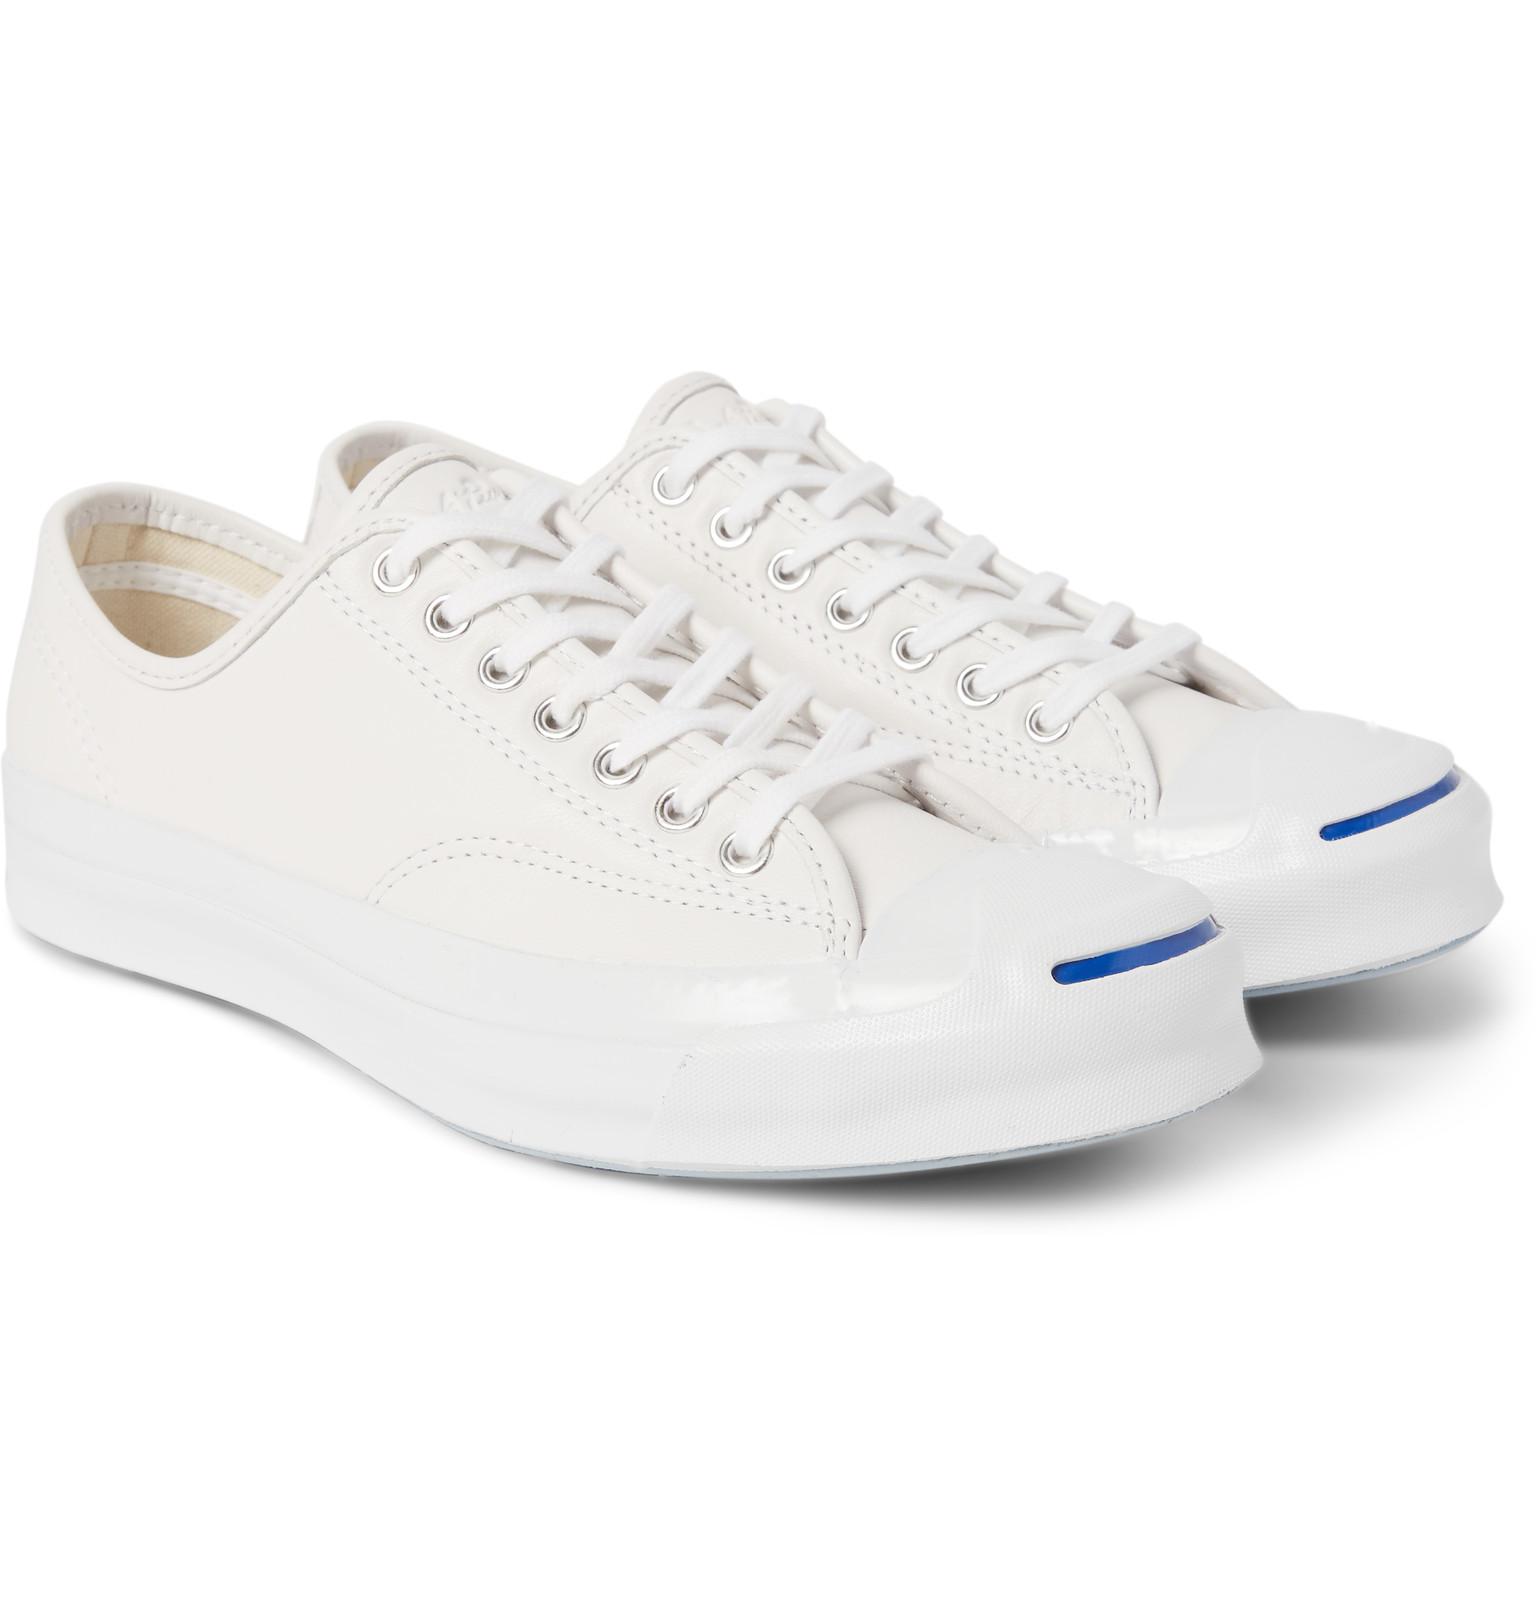 Converse - Purcell Signature Leather Off-white for Men - Lyst